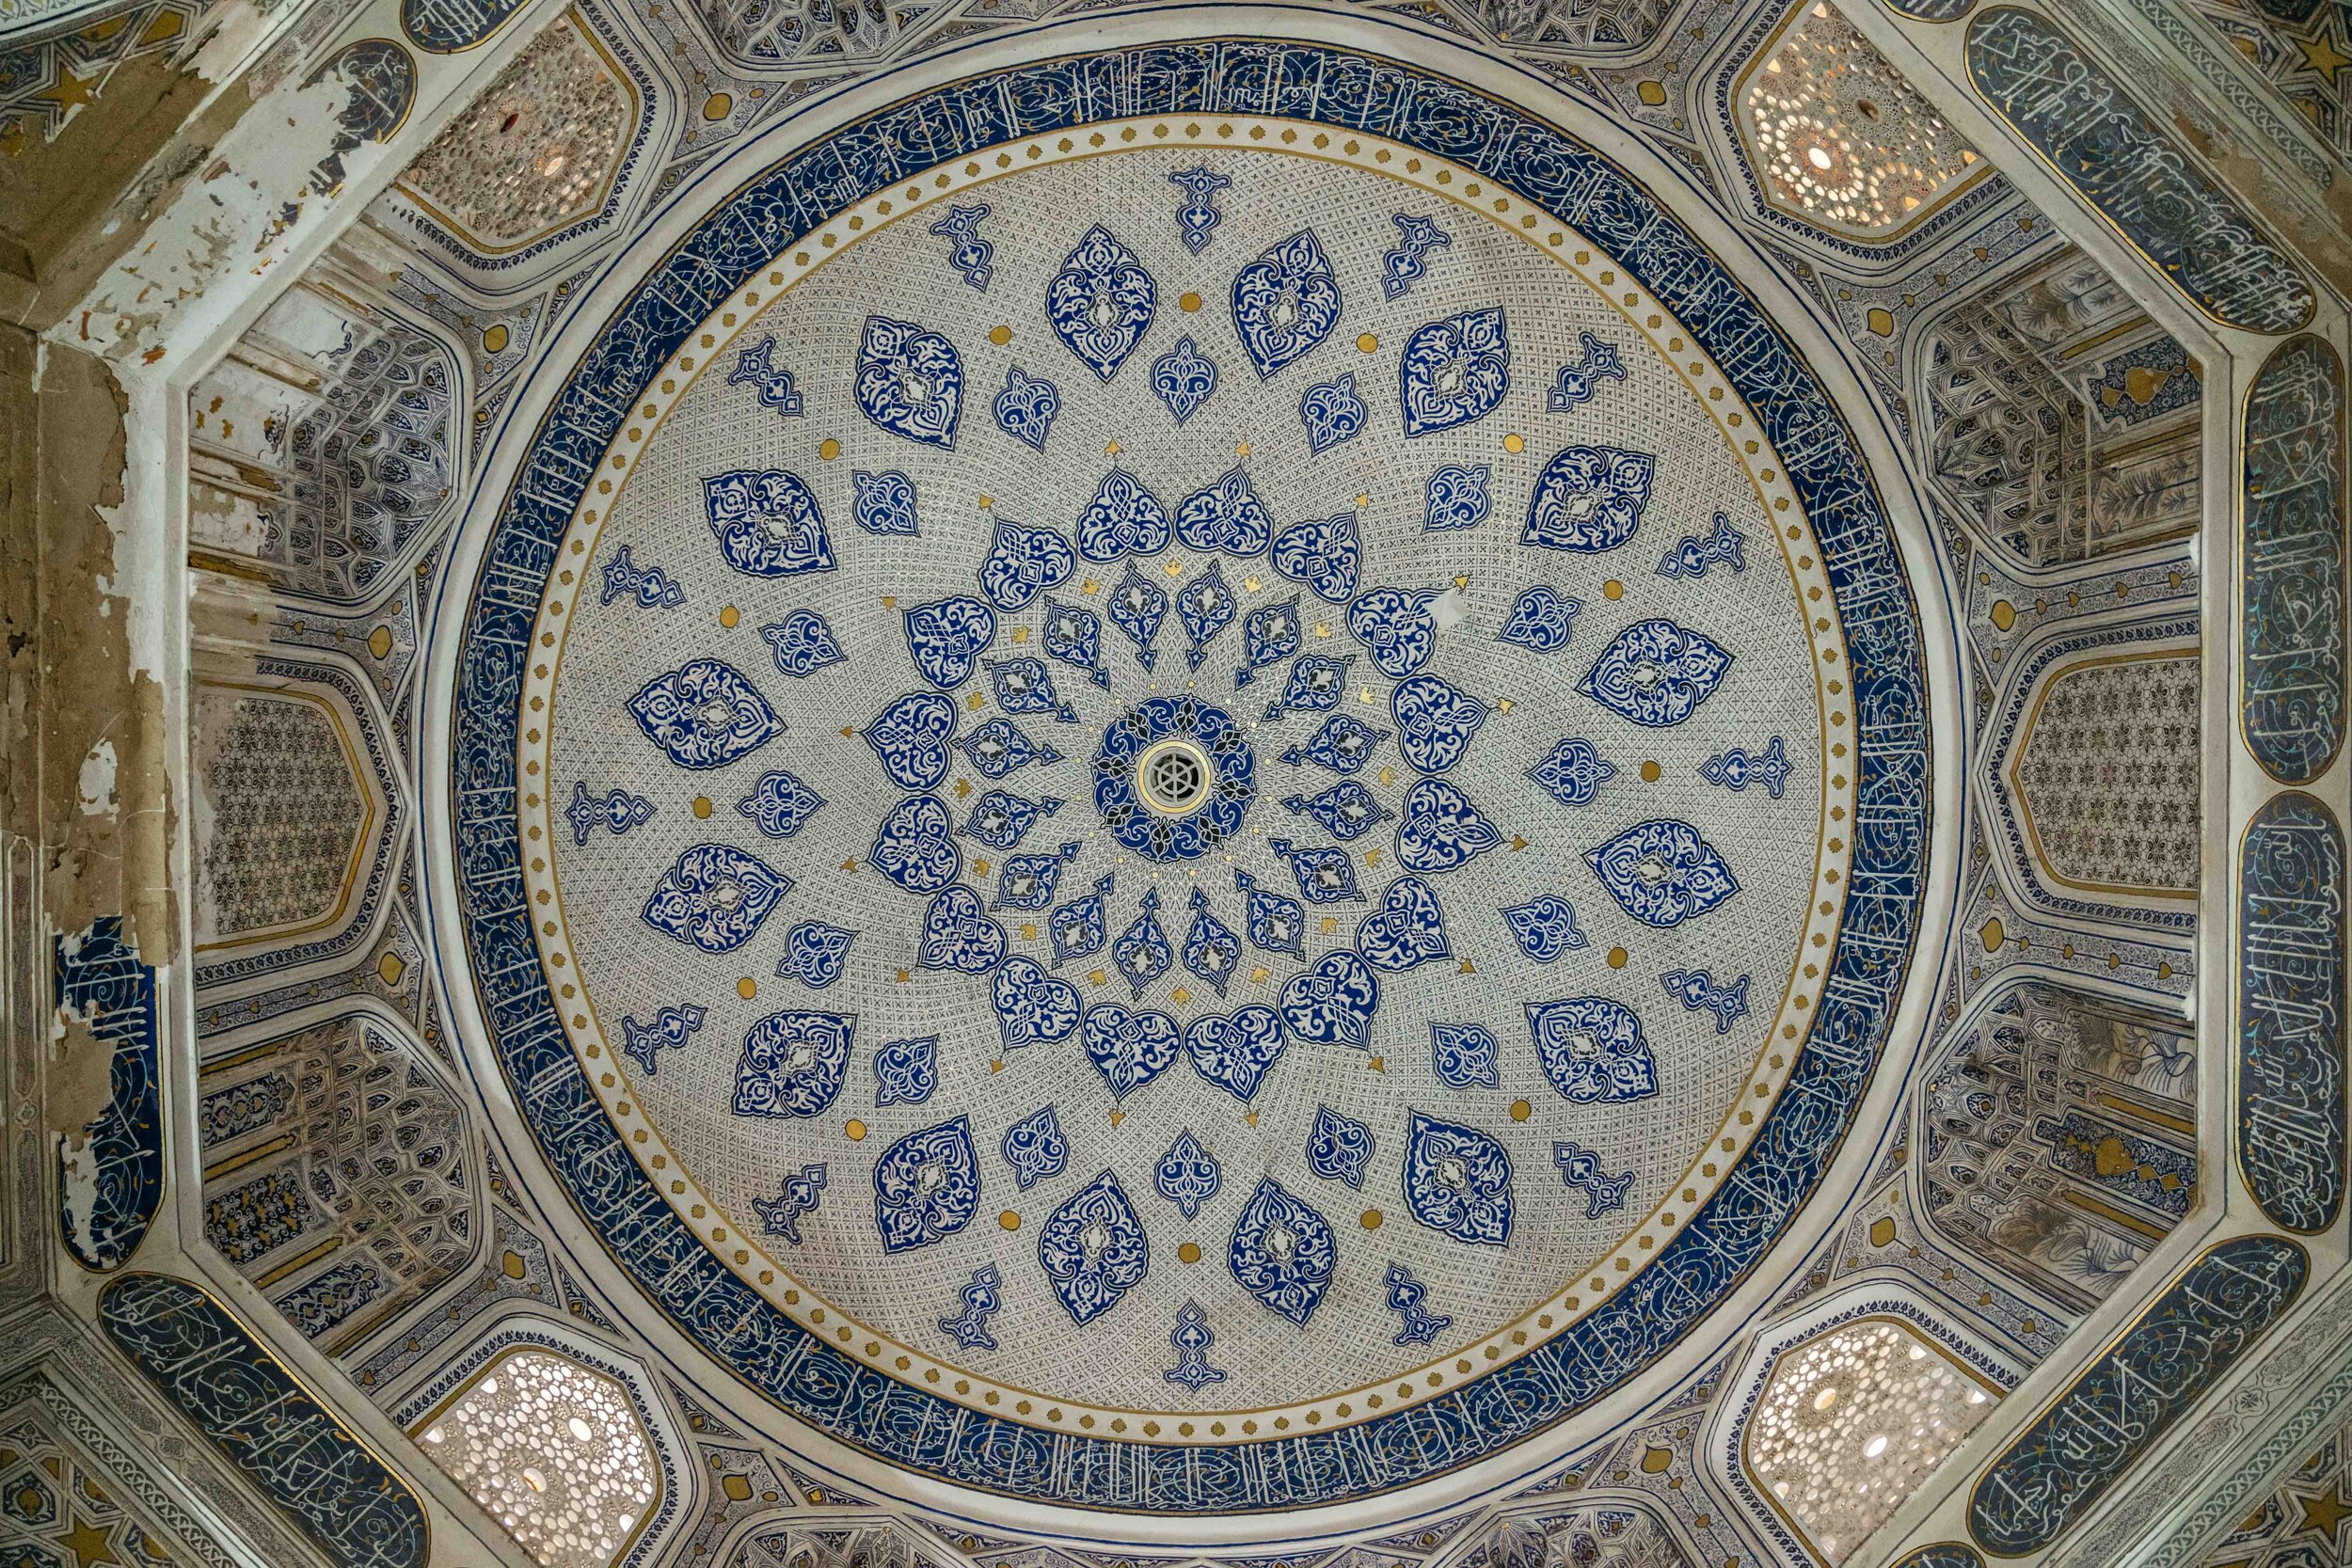  Ceiling details from one of the tombs 